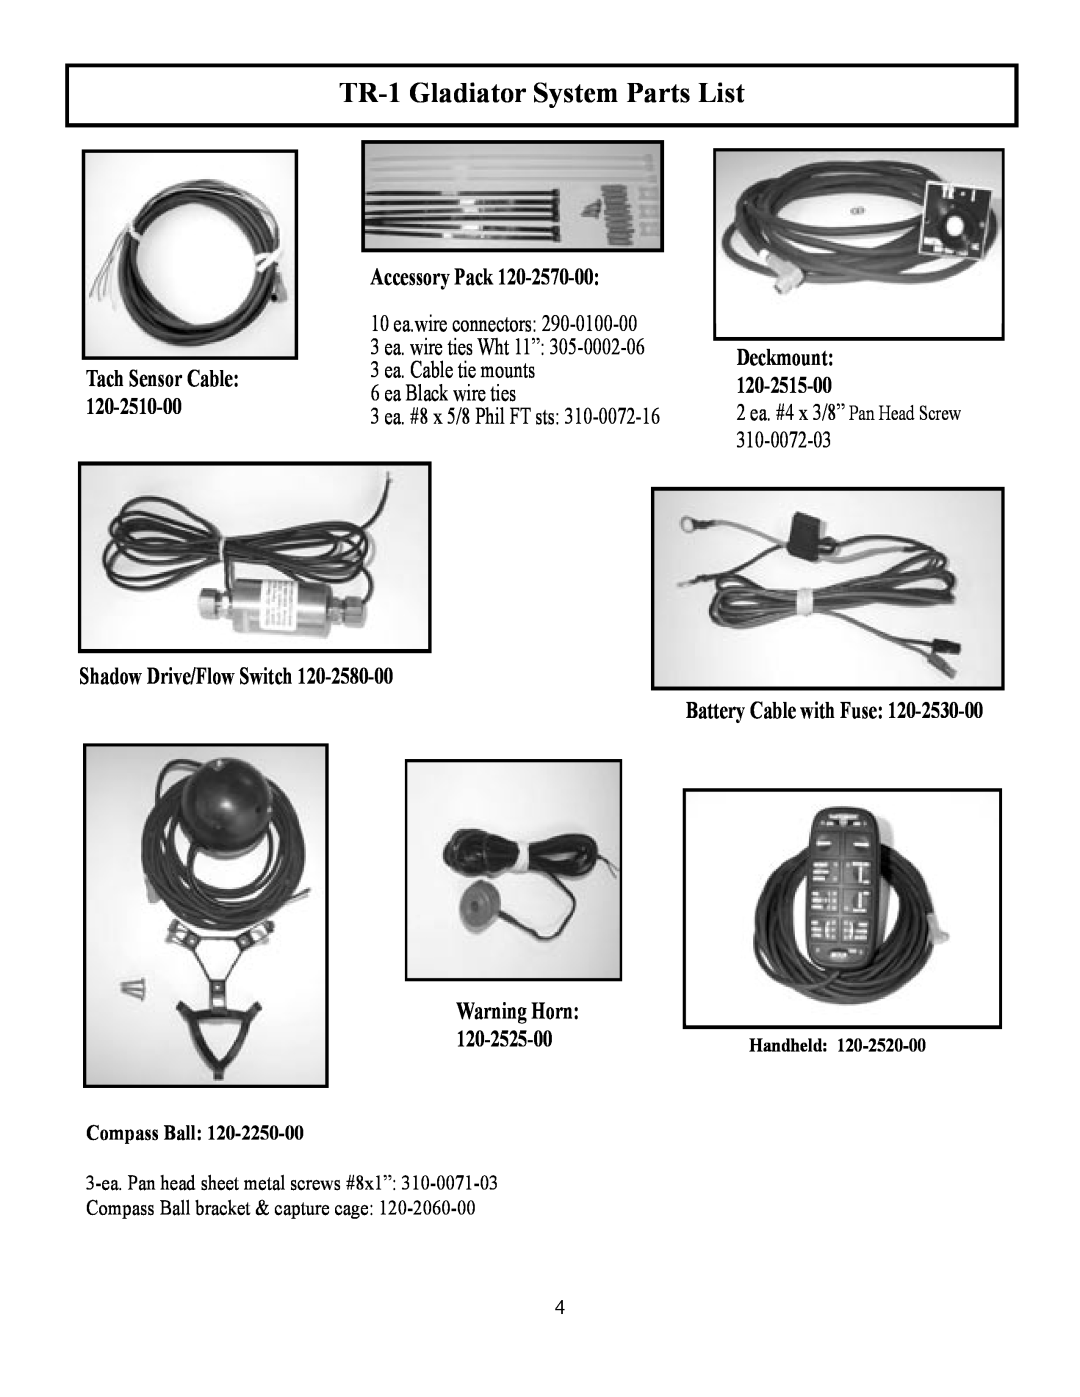 Garmin manual TR-1 Gladiator System Parts List, Accessory Pack, 10 ea.wire connectors, ea Black wire ties, Warning Horn 